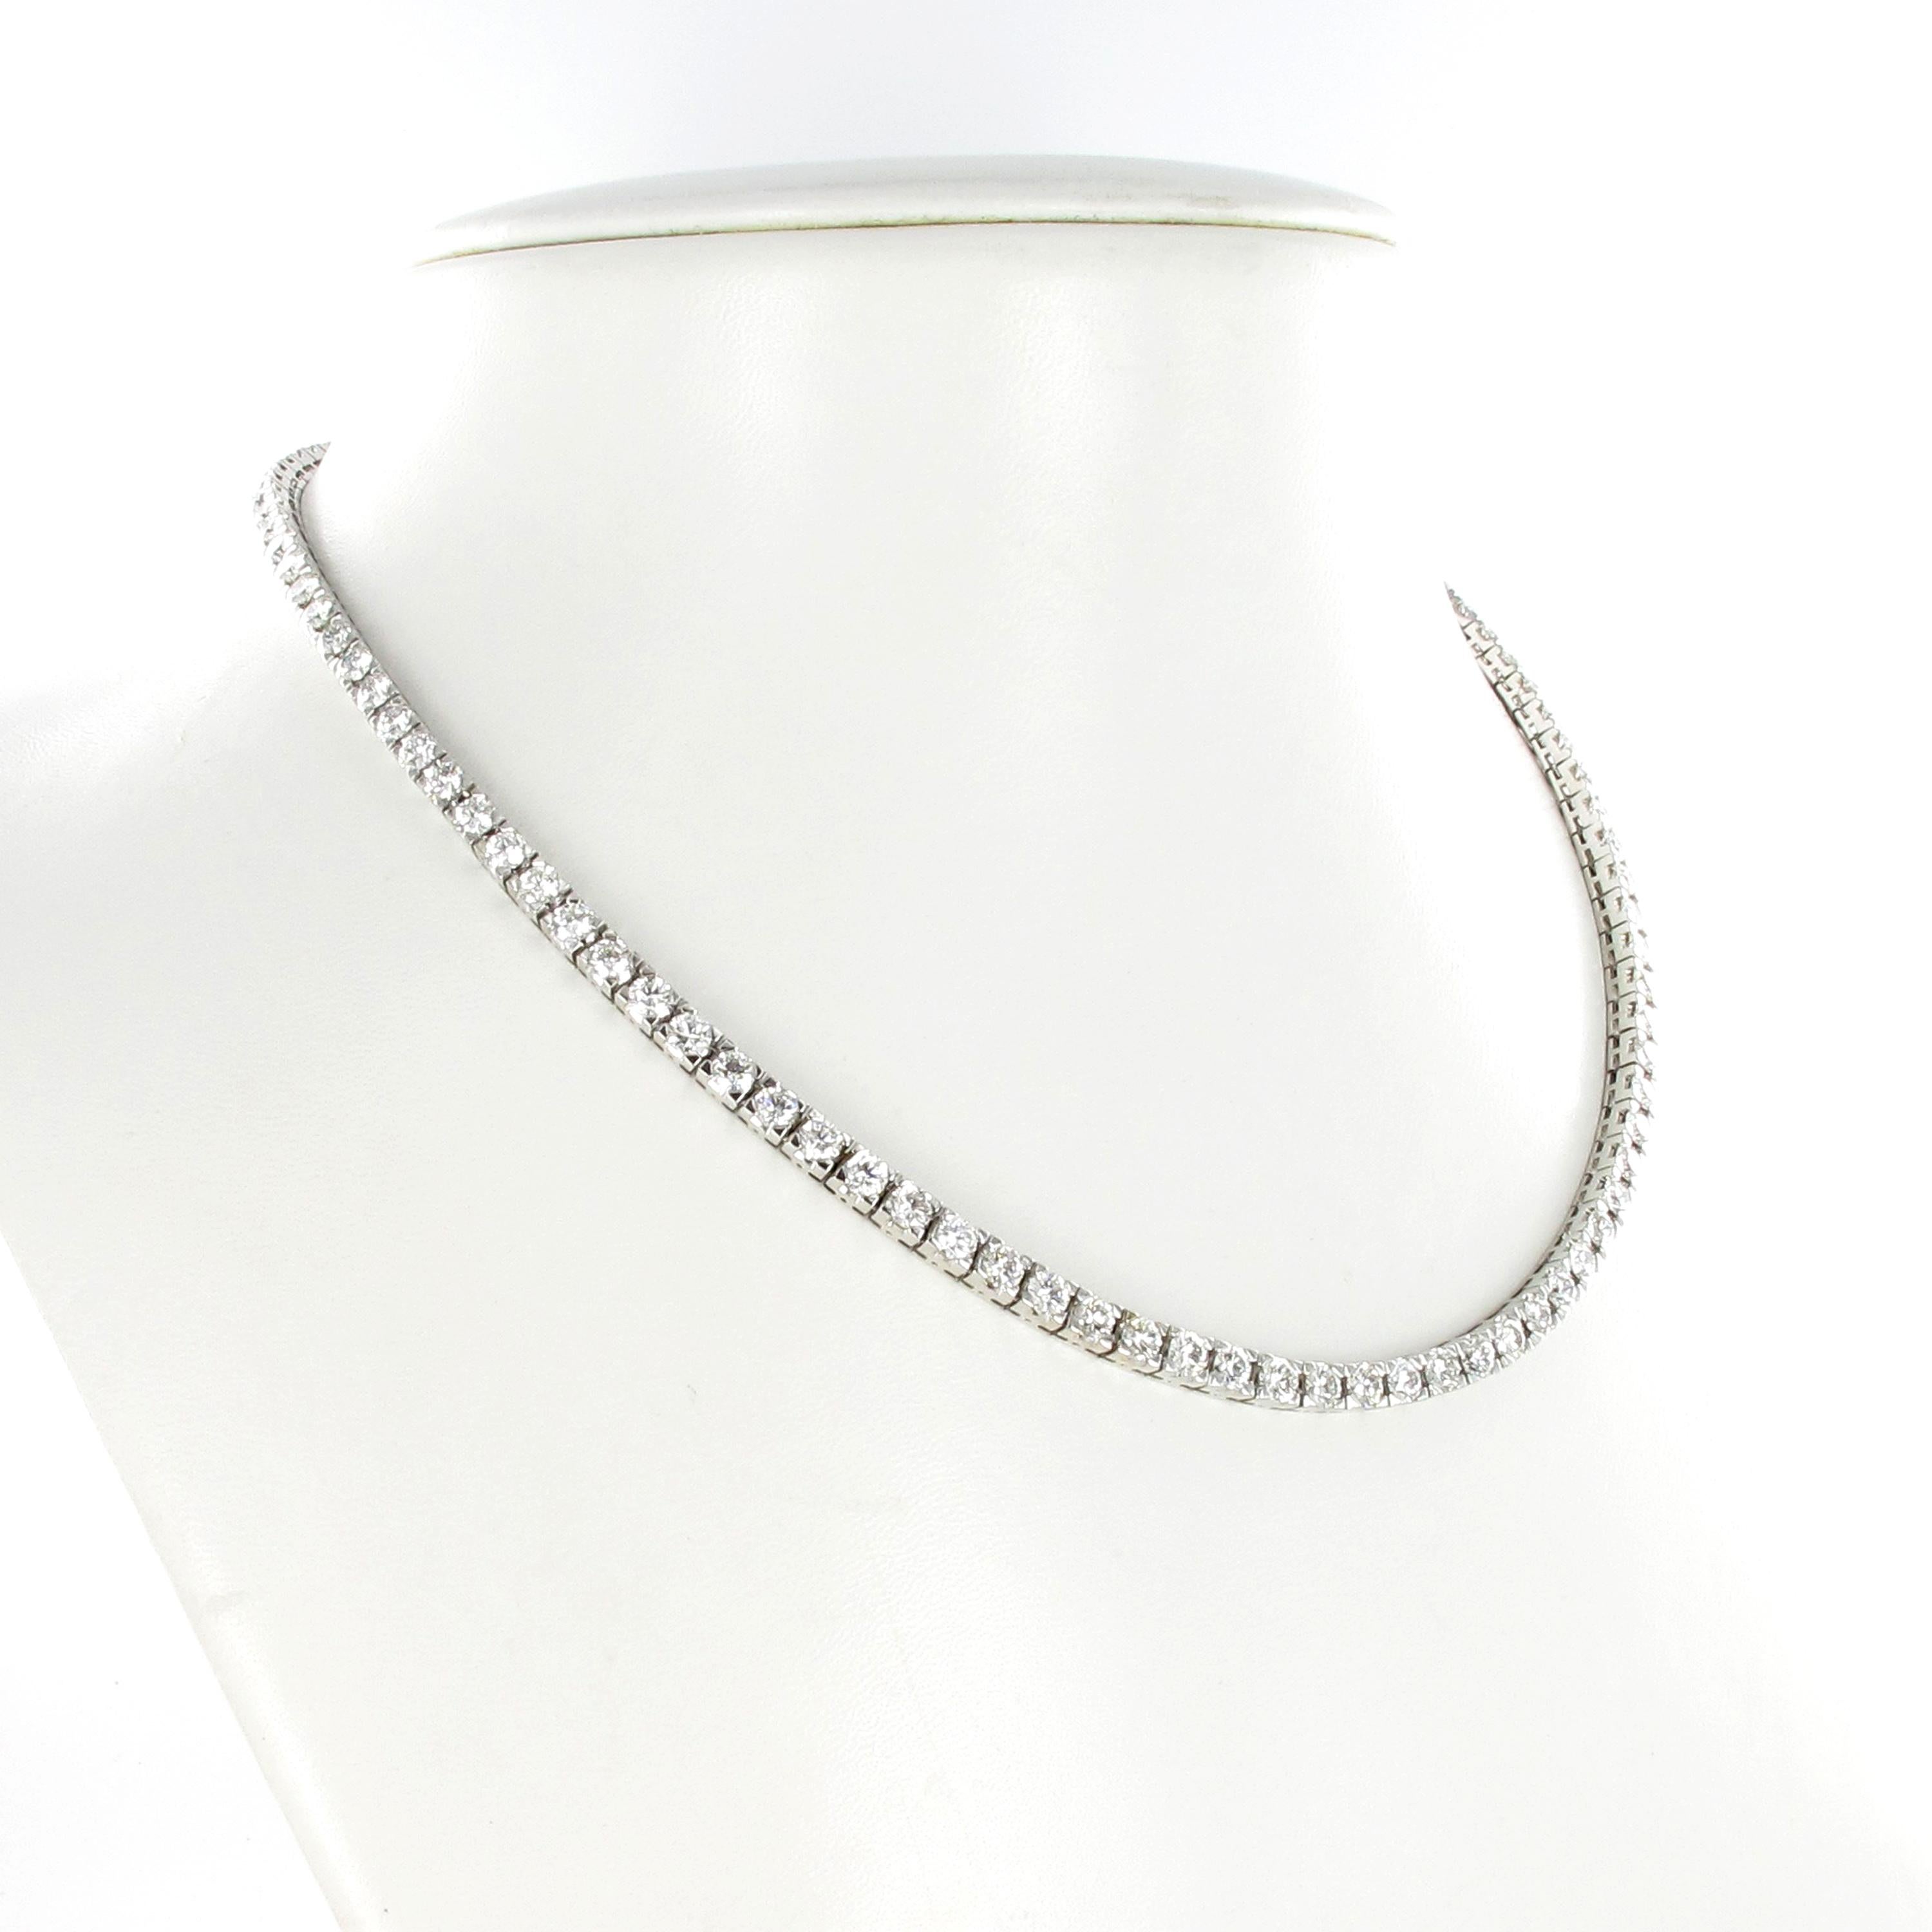 This beautiful and timeless rivière necklace in 18 karat white gold is prong-set with 103 brilliant-cut diamonds of G/H colour and vs/si clarity, total weight approximately 16.50 ct.
Due to its elegant workmanship, the necklace flows smoothly and